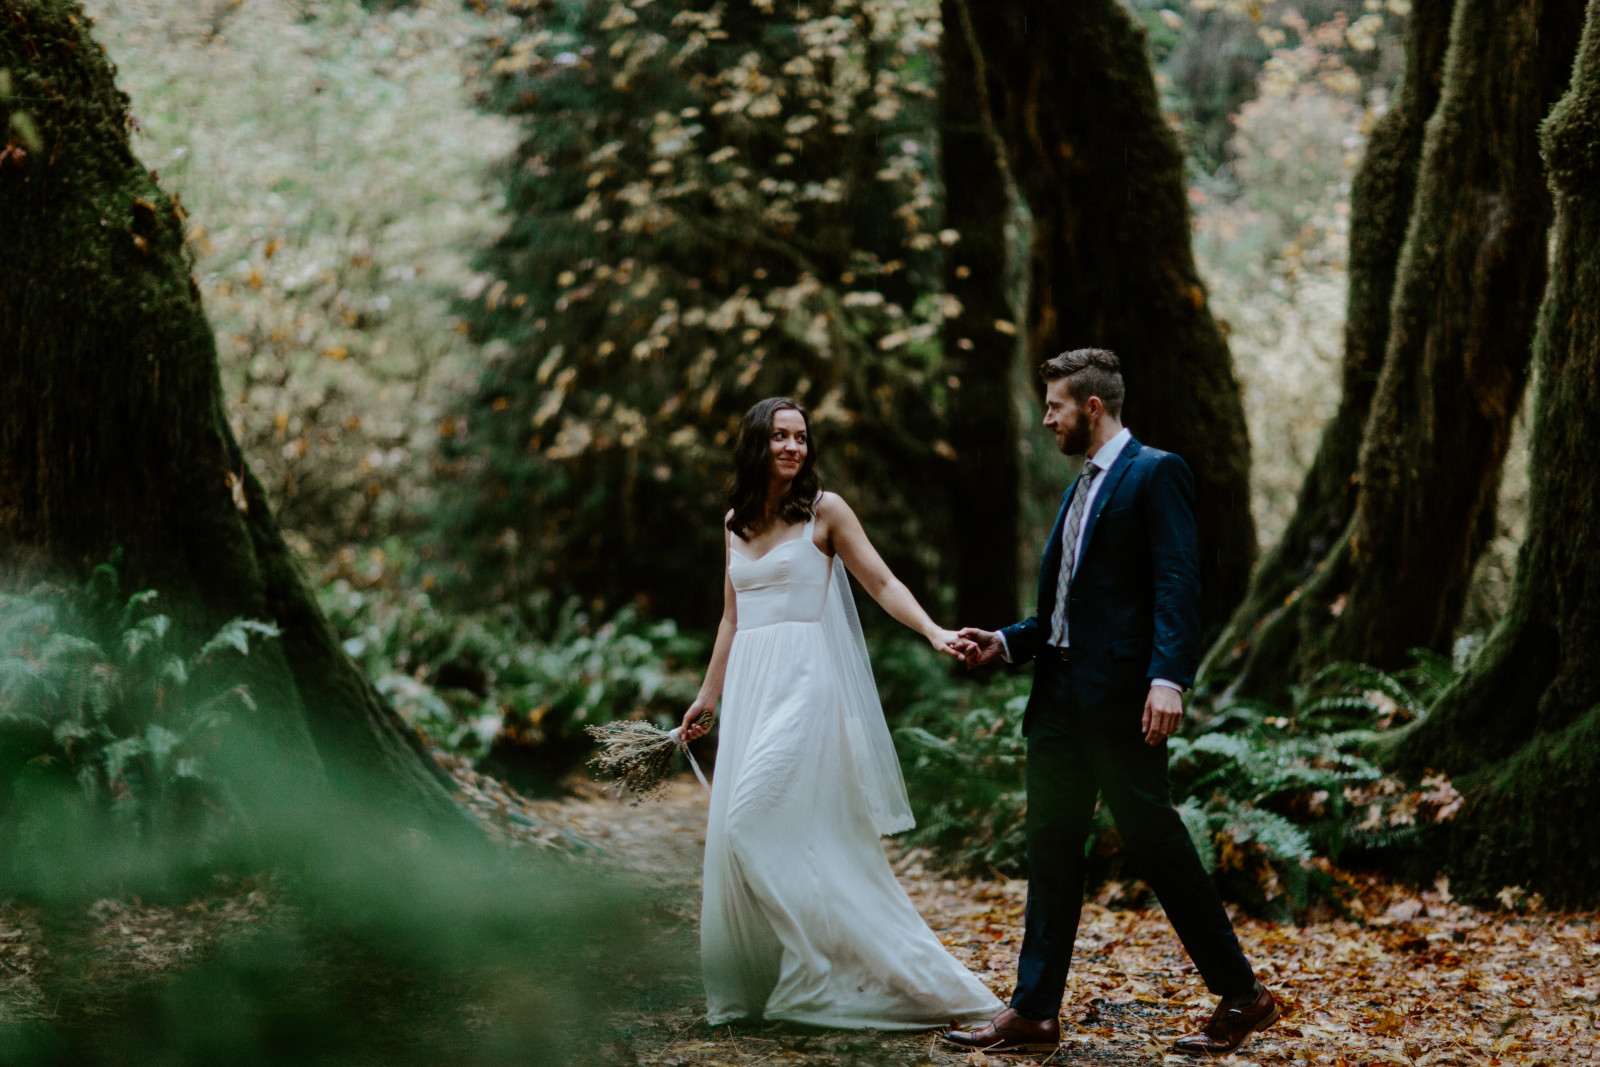 Corey and Mollie hold hands as they walk. Elopement photography in the Olympic National Park by Sienna Plus Josh.